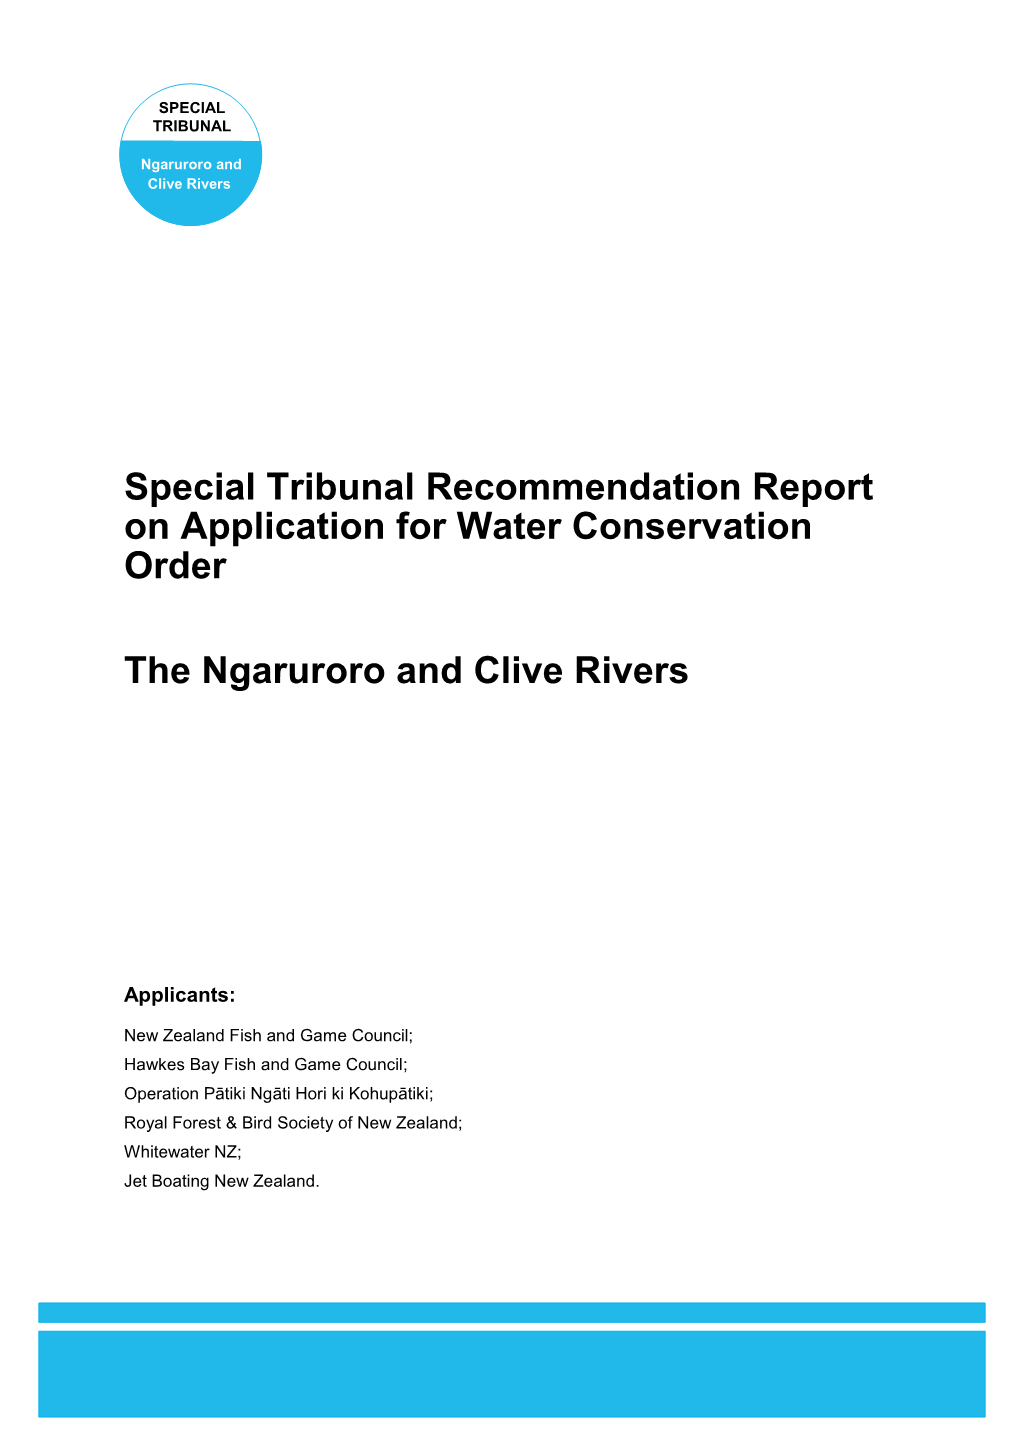 RECOMMENDATION REPORT of Special Tribunal for Water